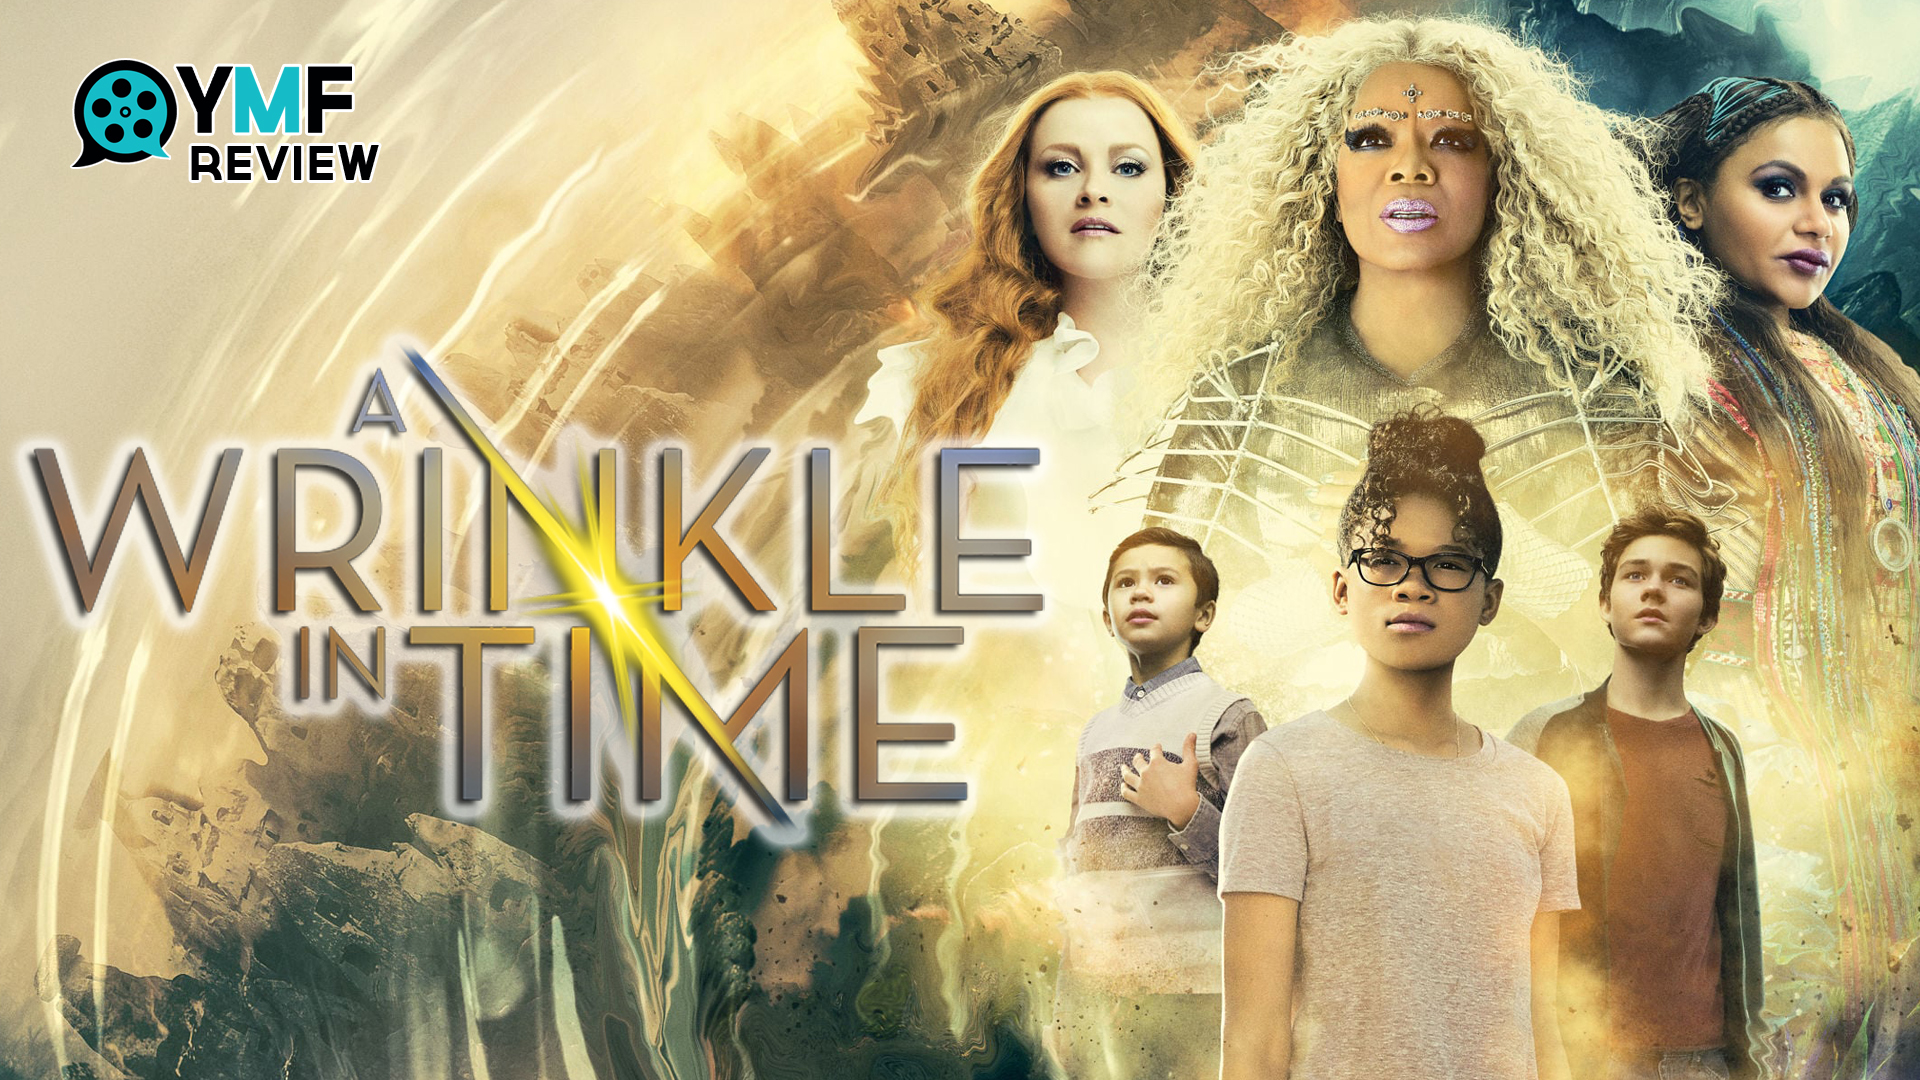 SiftPop|5 Things About “A Wrinkle in Time” (Movie Review)